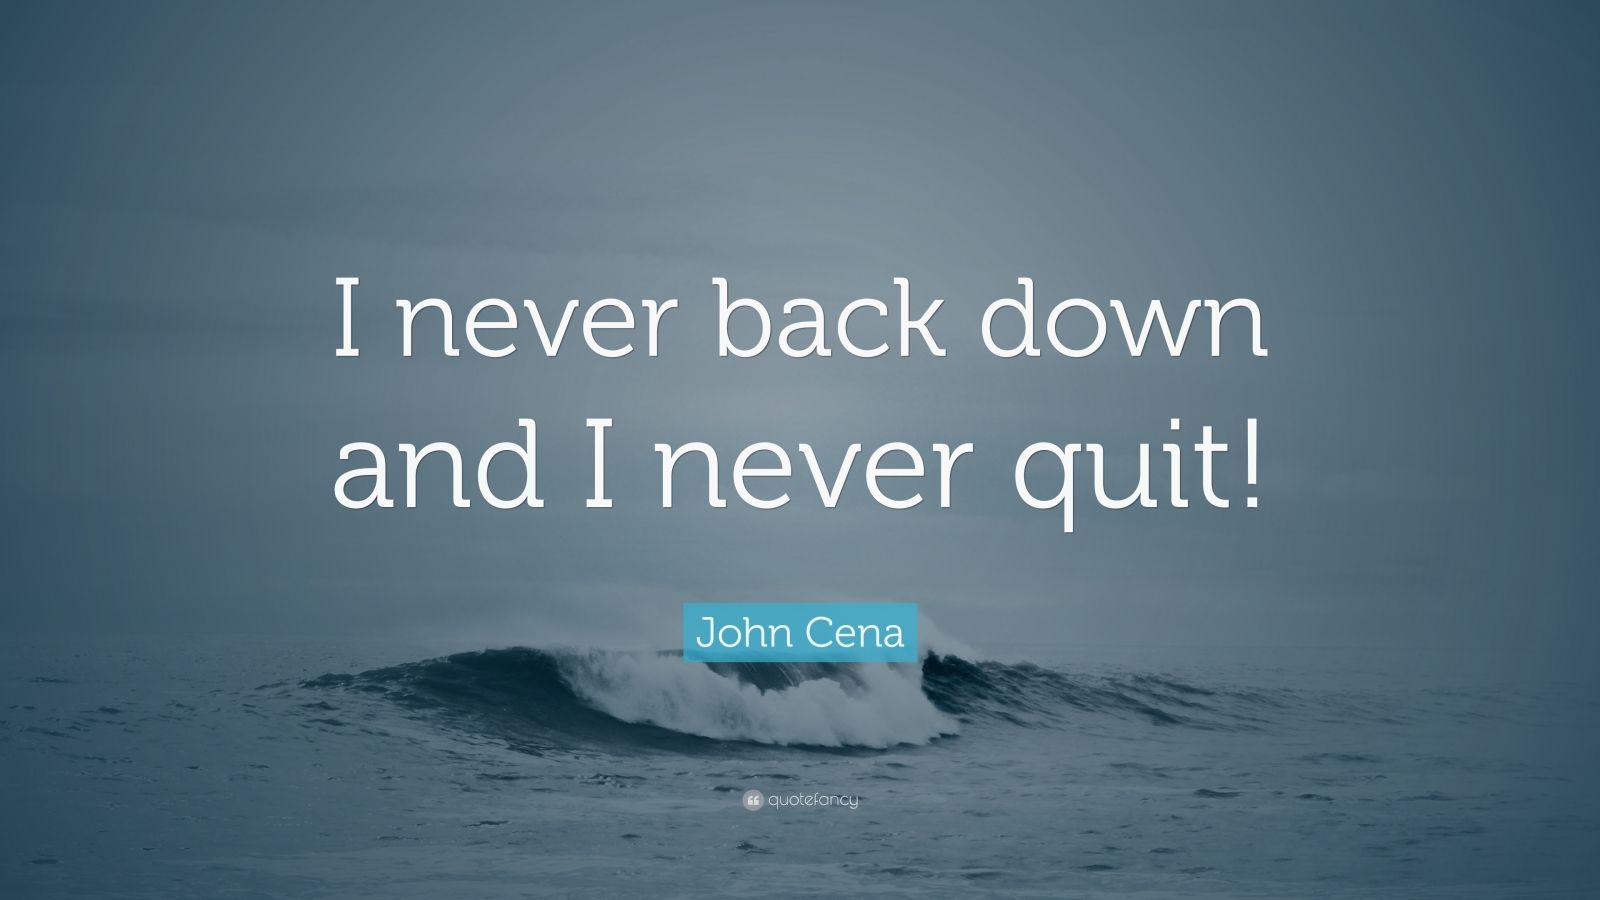 John Cena Quote: “I never back down and I never quit!” (12 wallpapers